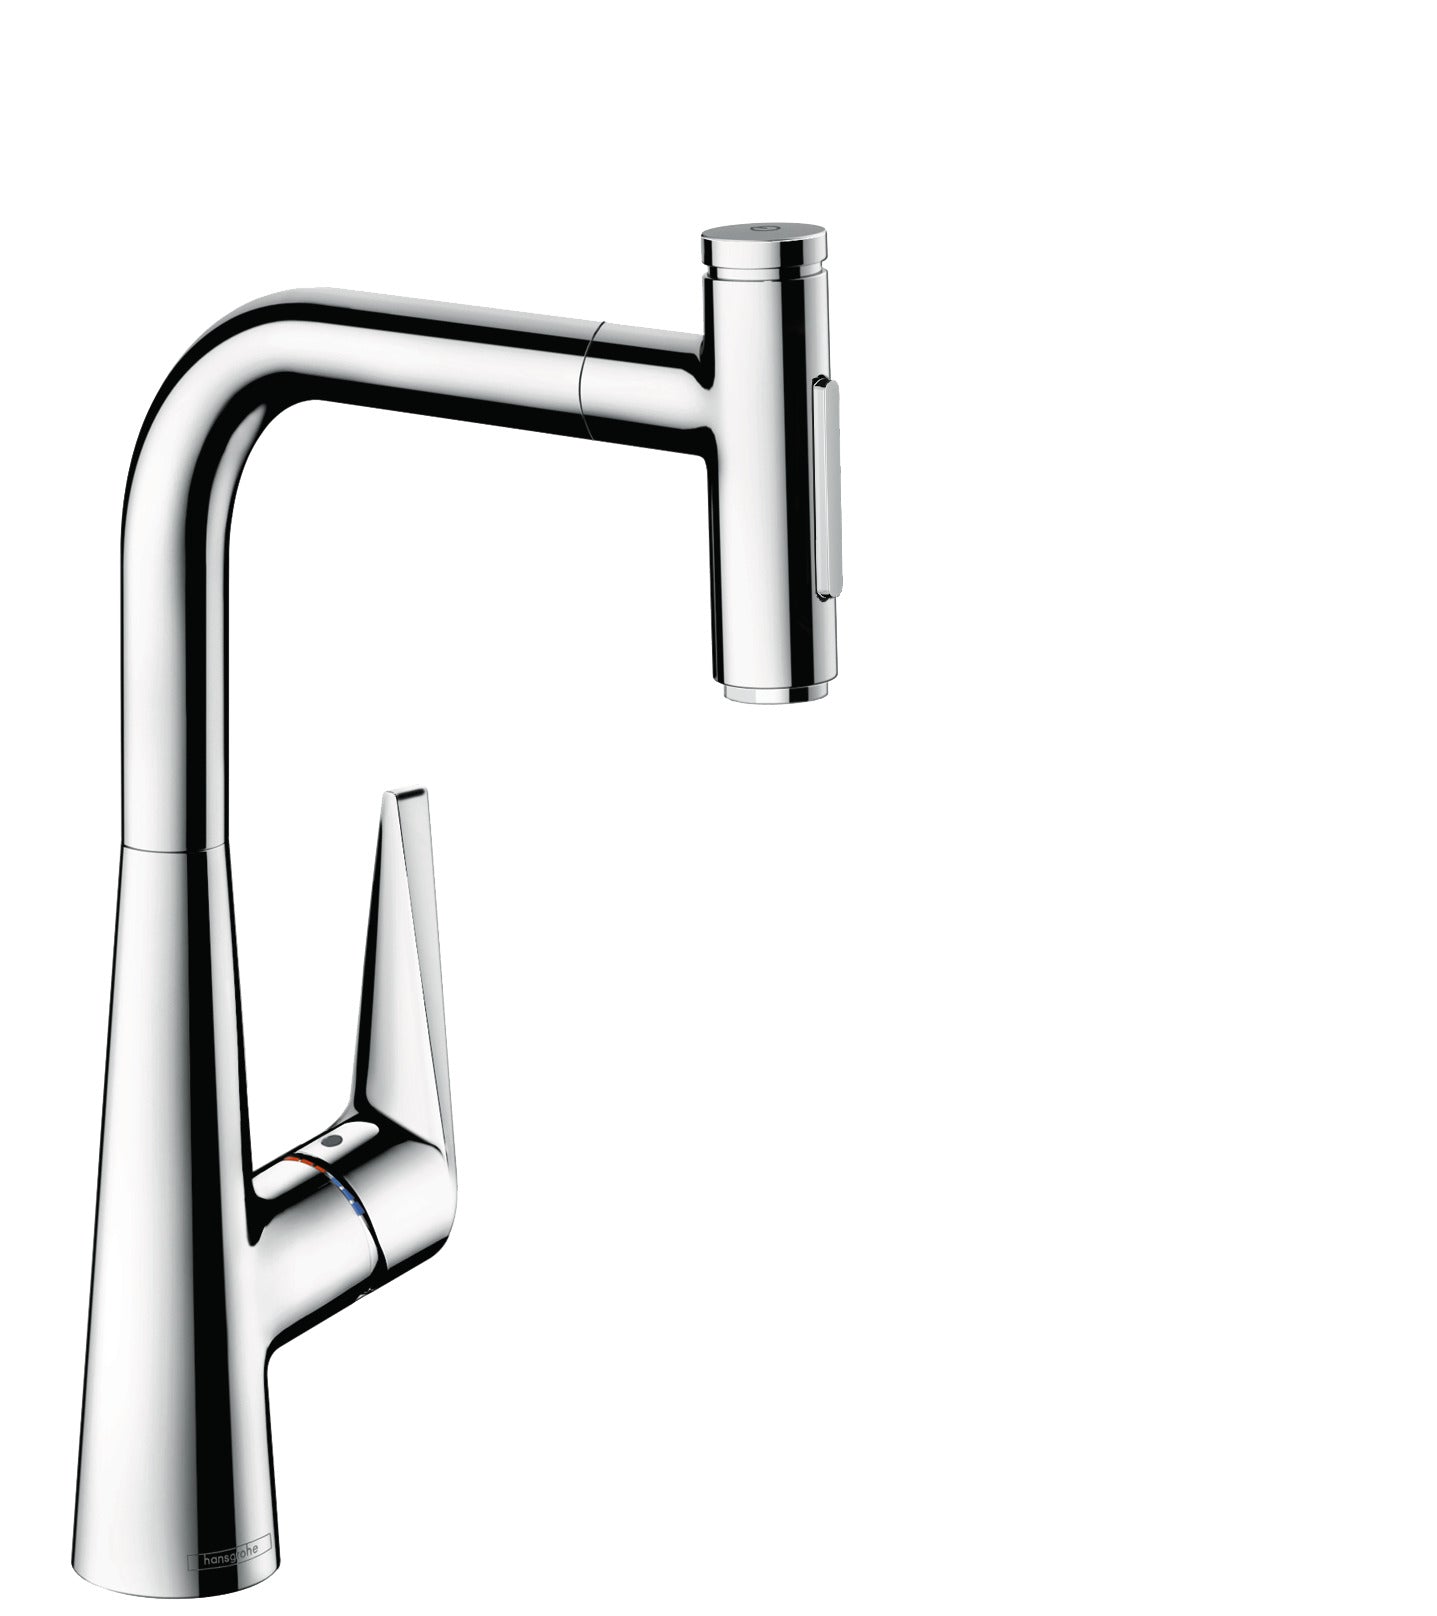 HANSGROHE 72823001 Chrome Talis Select S Modern Kitchen Faucet 1.75 GPM